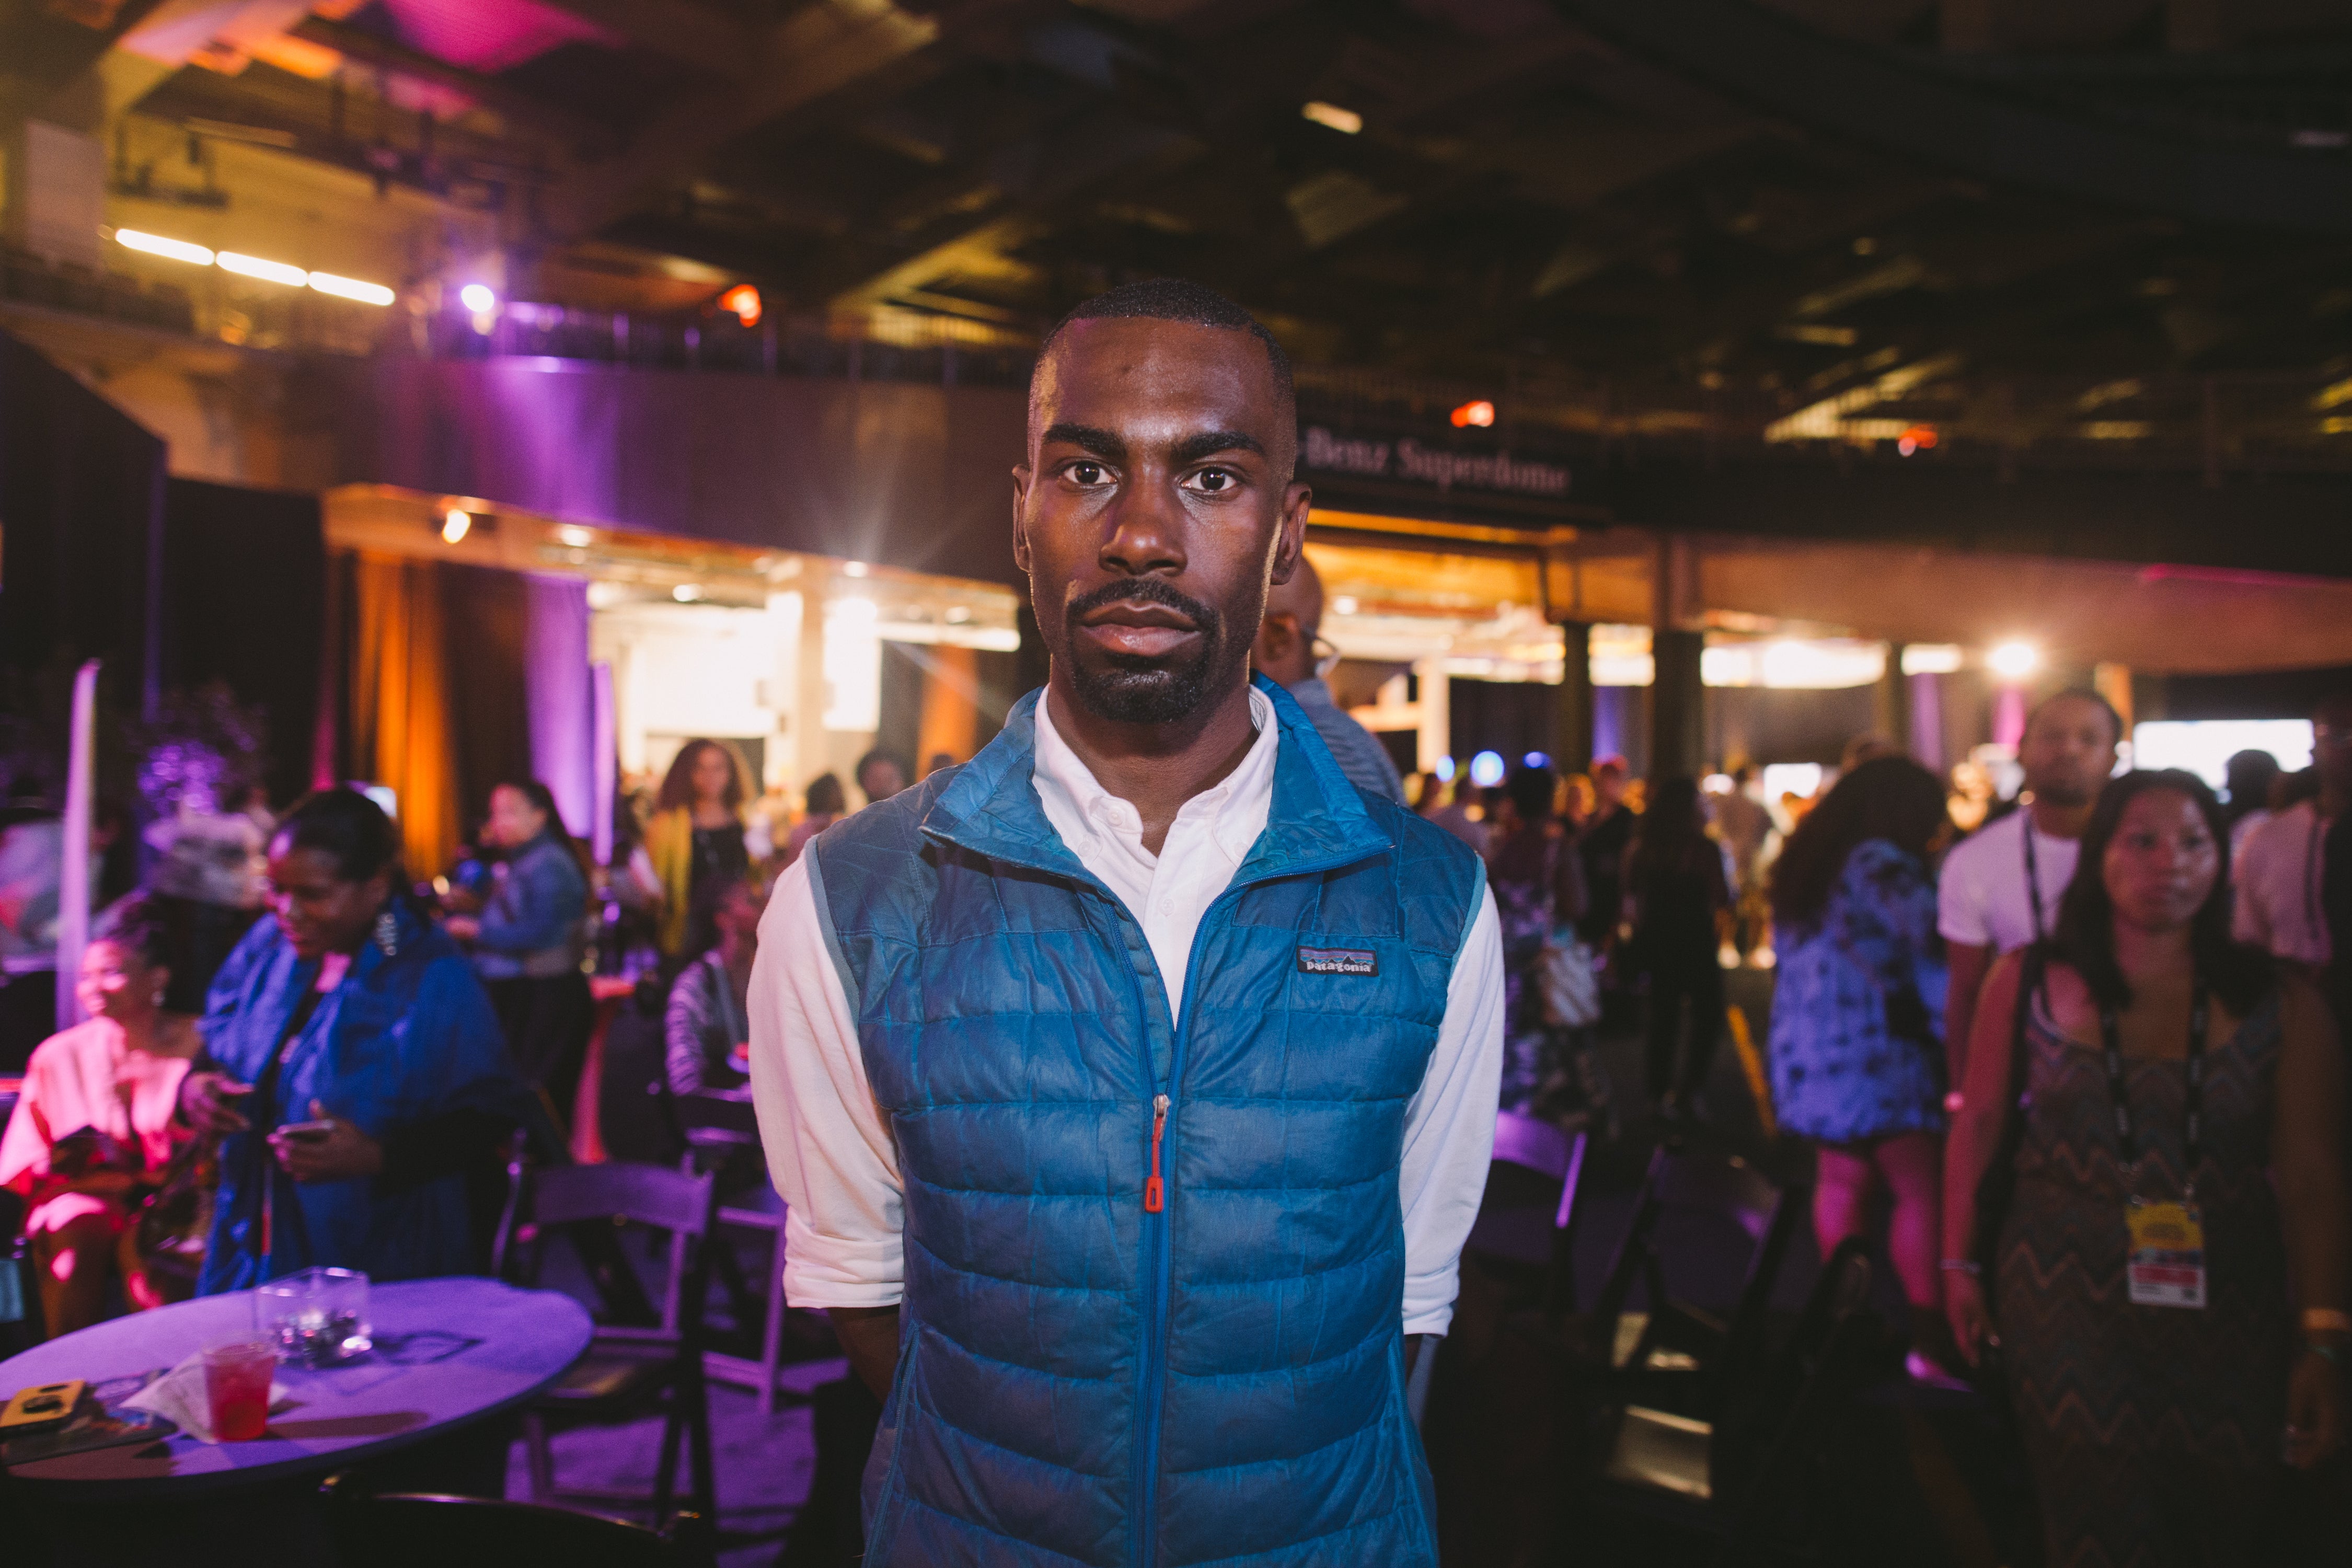 DeRay McKesson Discusses His New Book 'On The Other Side Of Freedom: The Case For Hope"